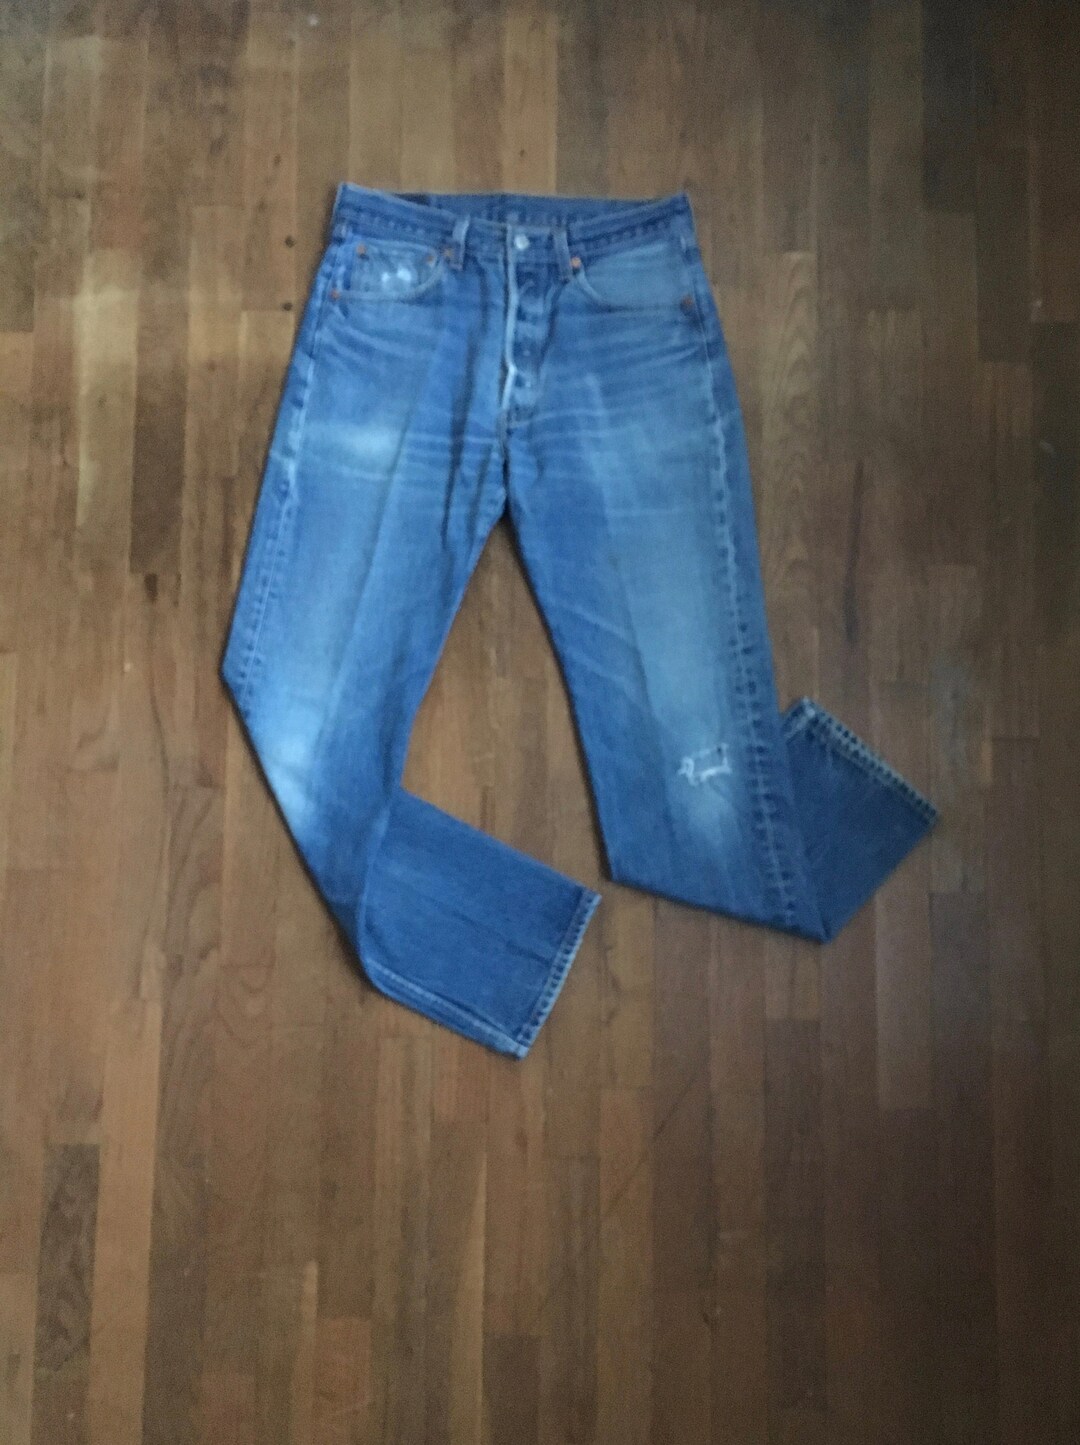 Vintage Levis 501 Xx Blue Jeans Made in Usa 31 X 31 - Etsy